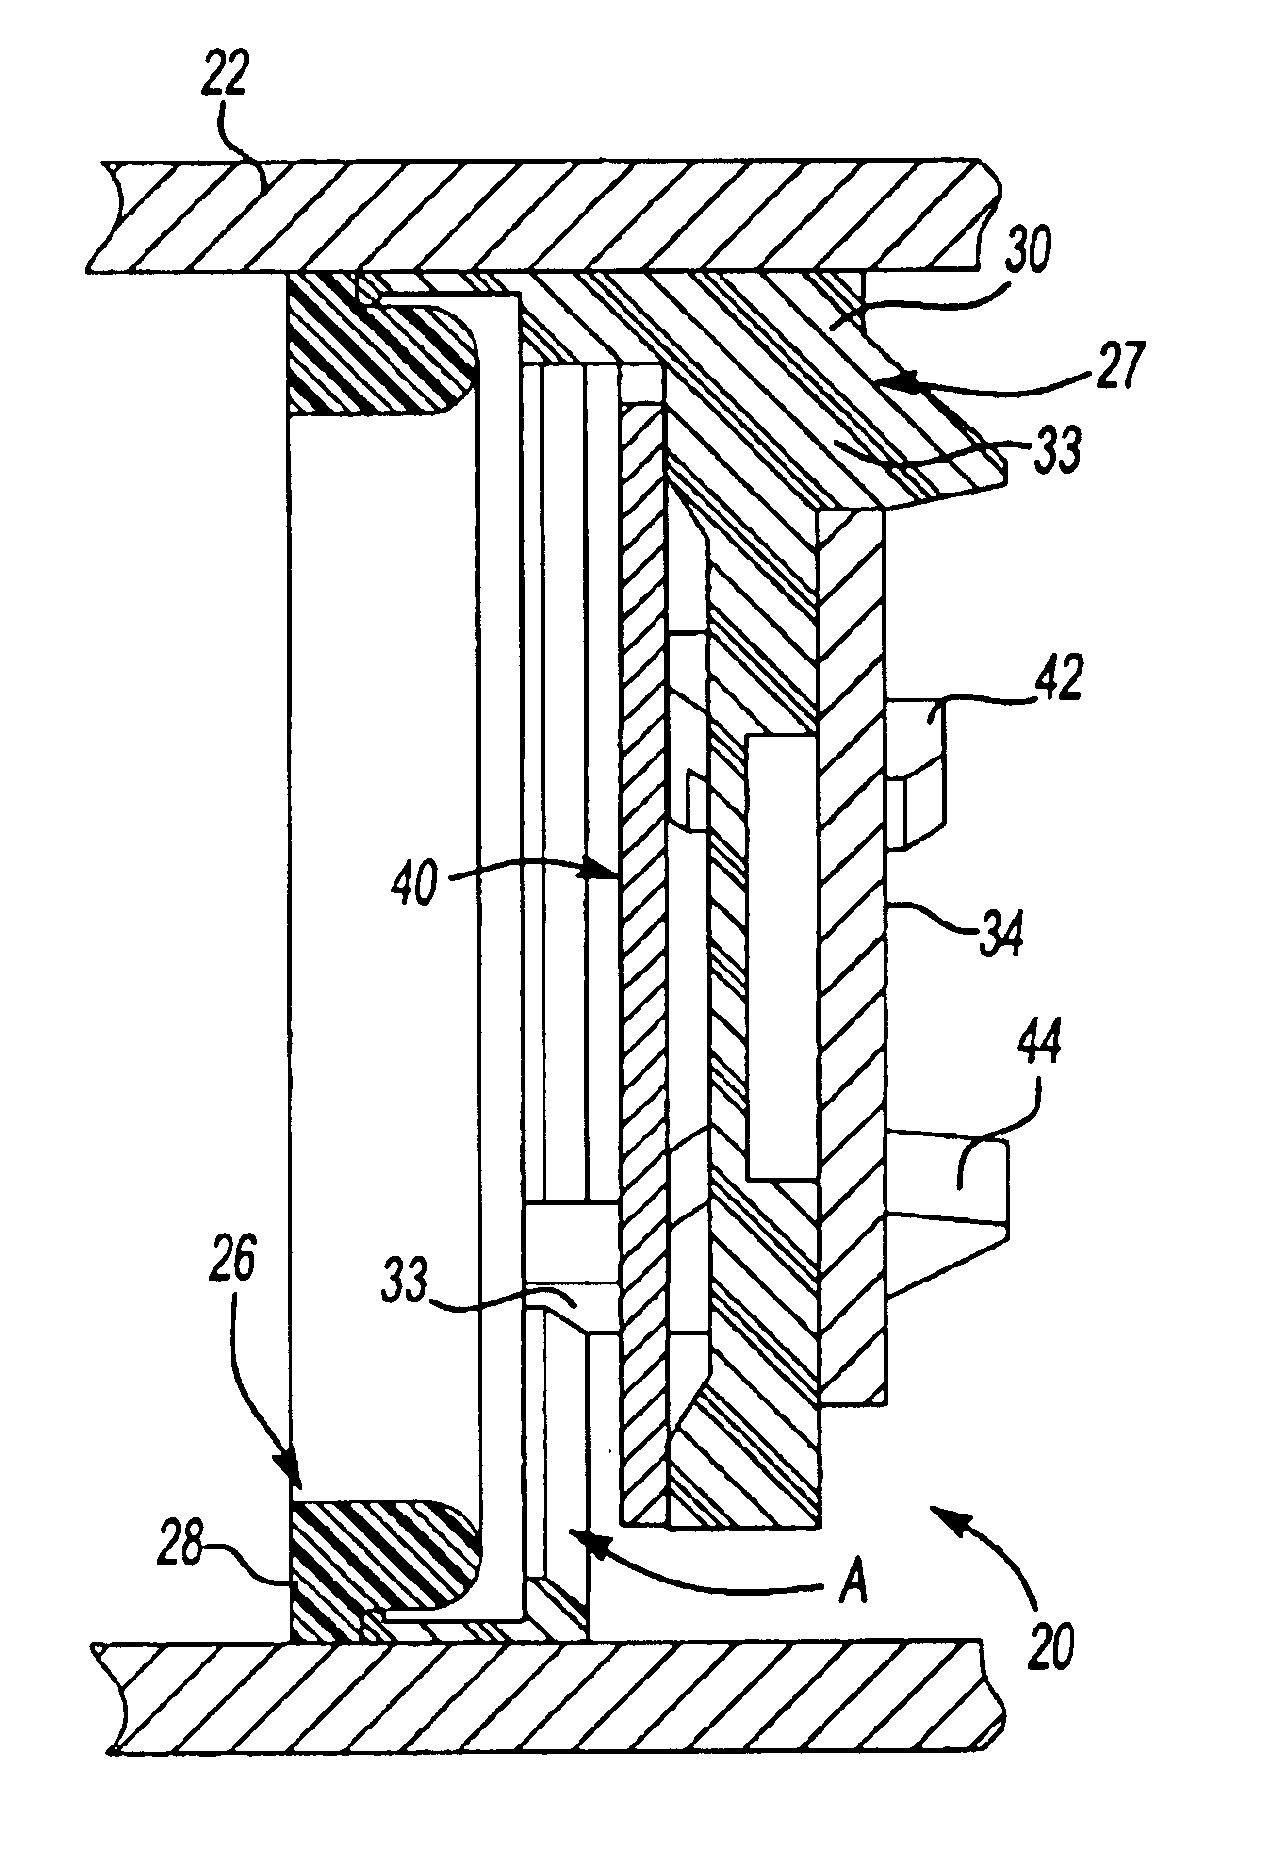 Excess flow valve with magnet